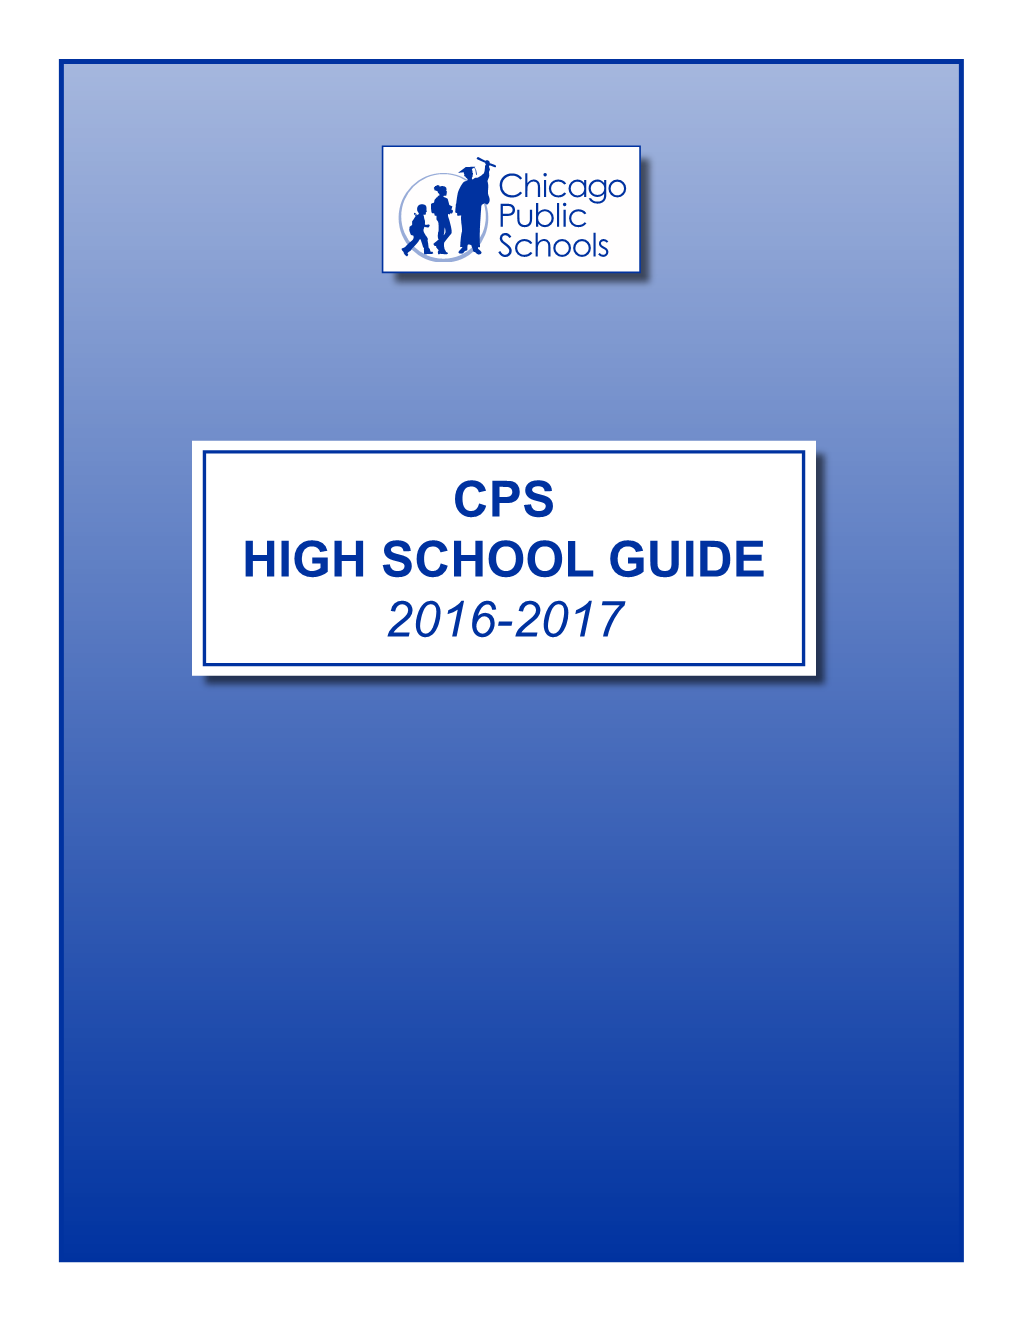 CPS HIGH SCHOOL GUIDE 2016-2017 Forrest Claypool Chief Executive Officer